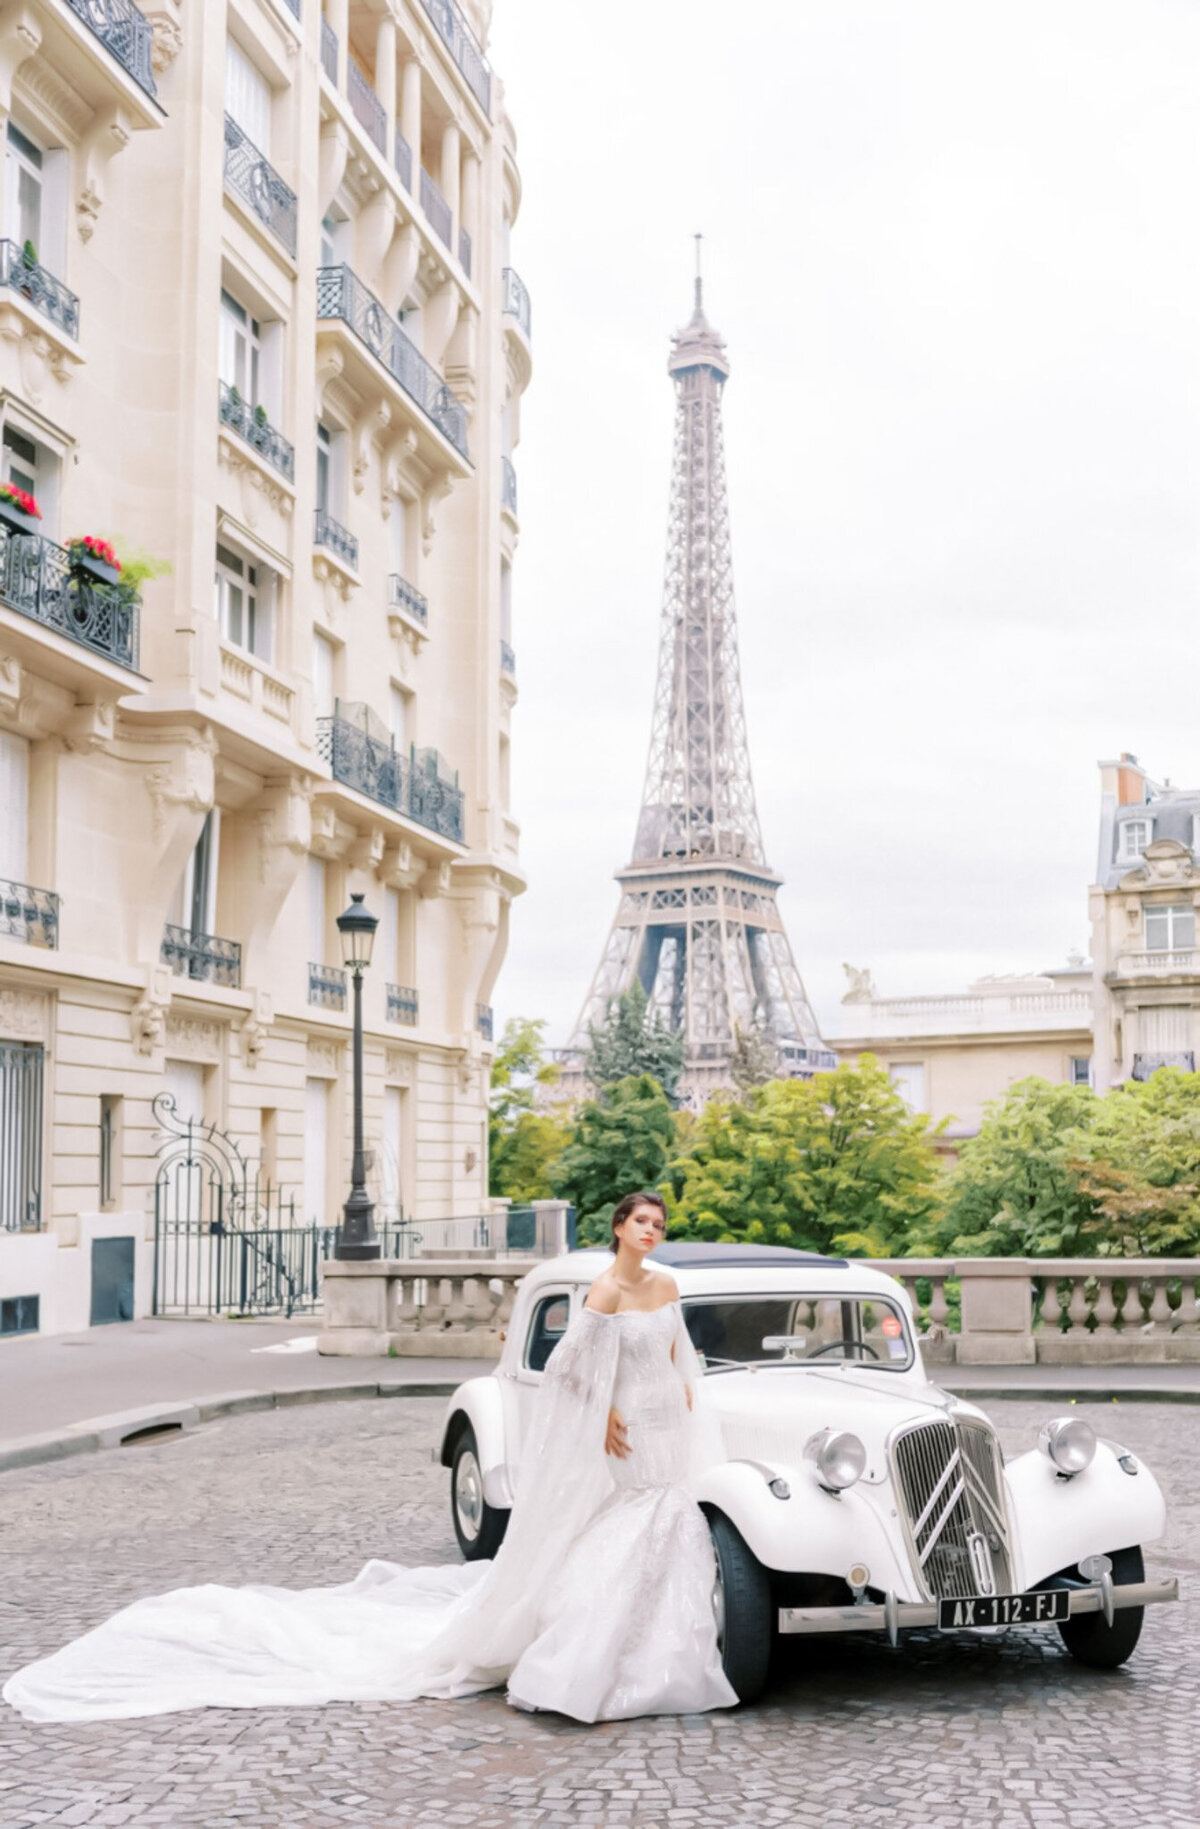 Rooftop wedding in Paris with eiffel tower view (12)